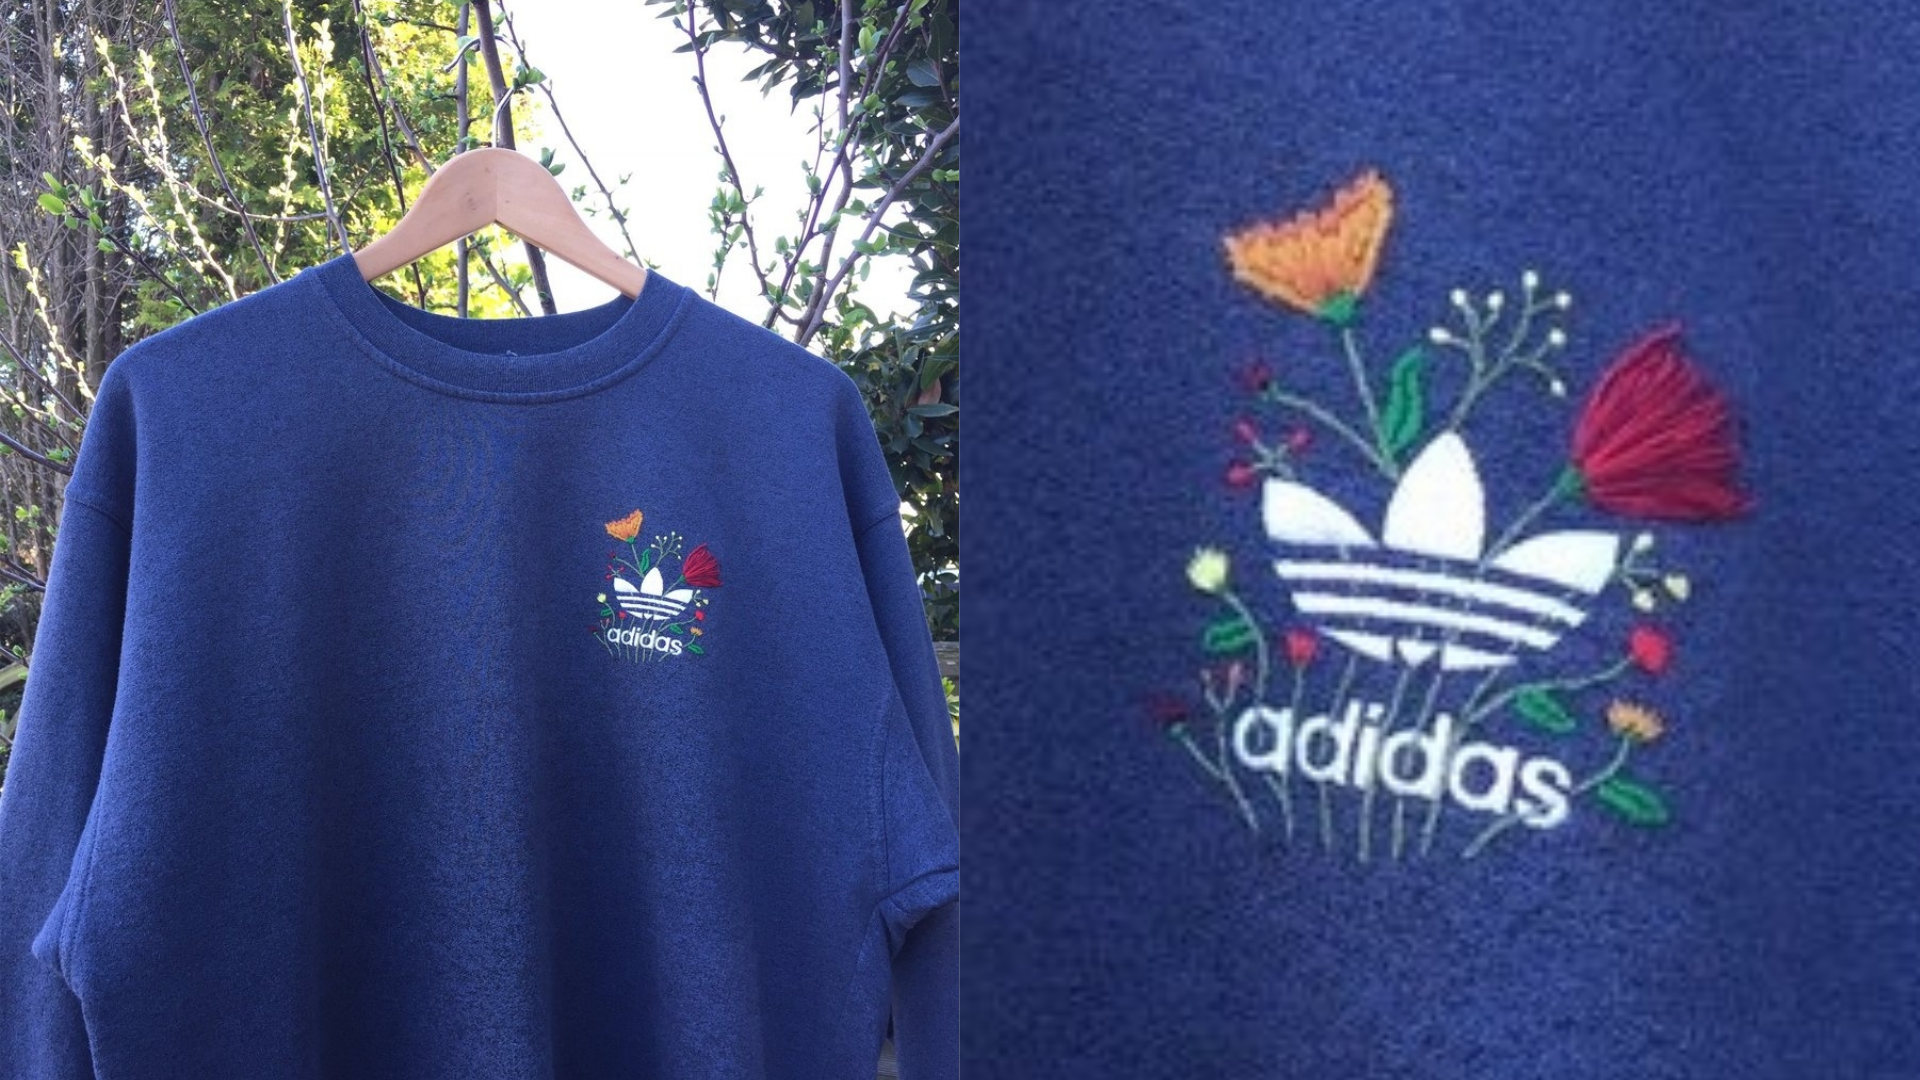 How one man's Adidas embroidery is him and thousands very - The Irish